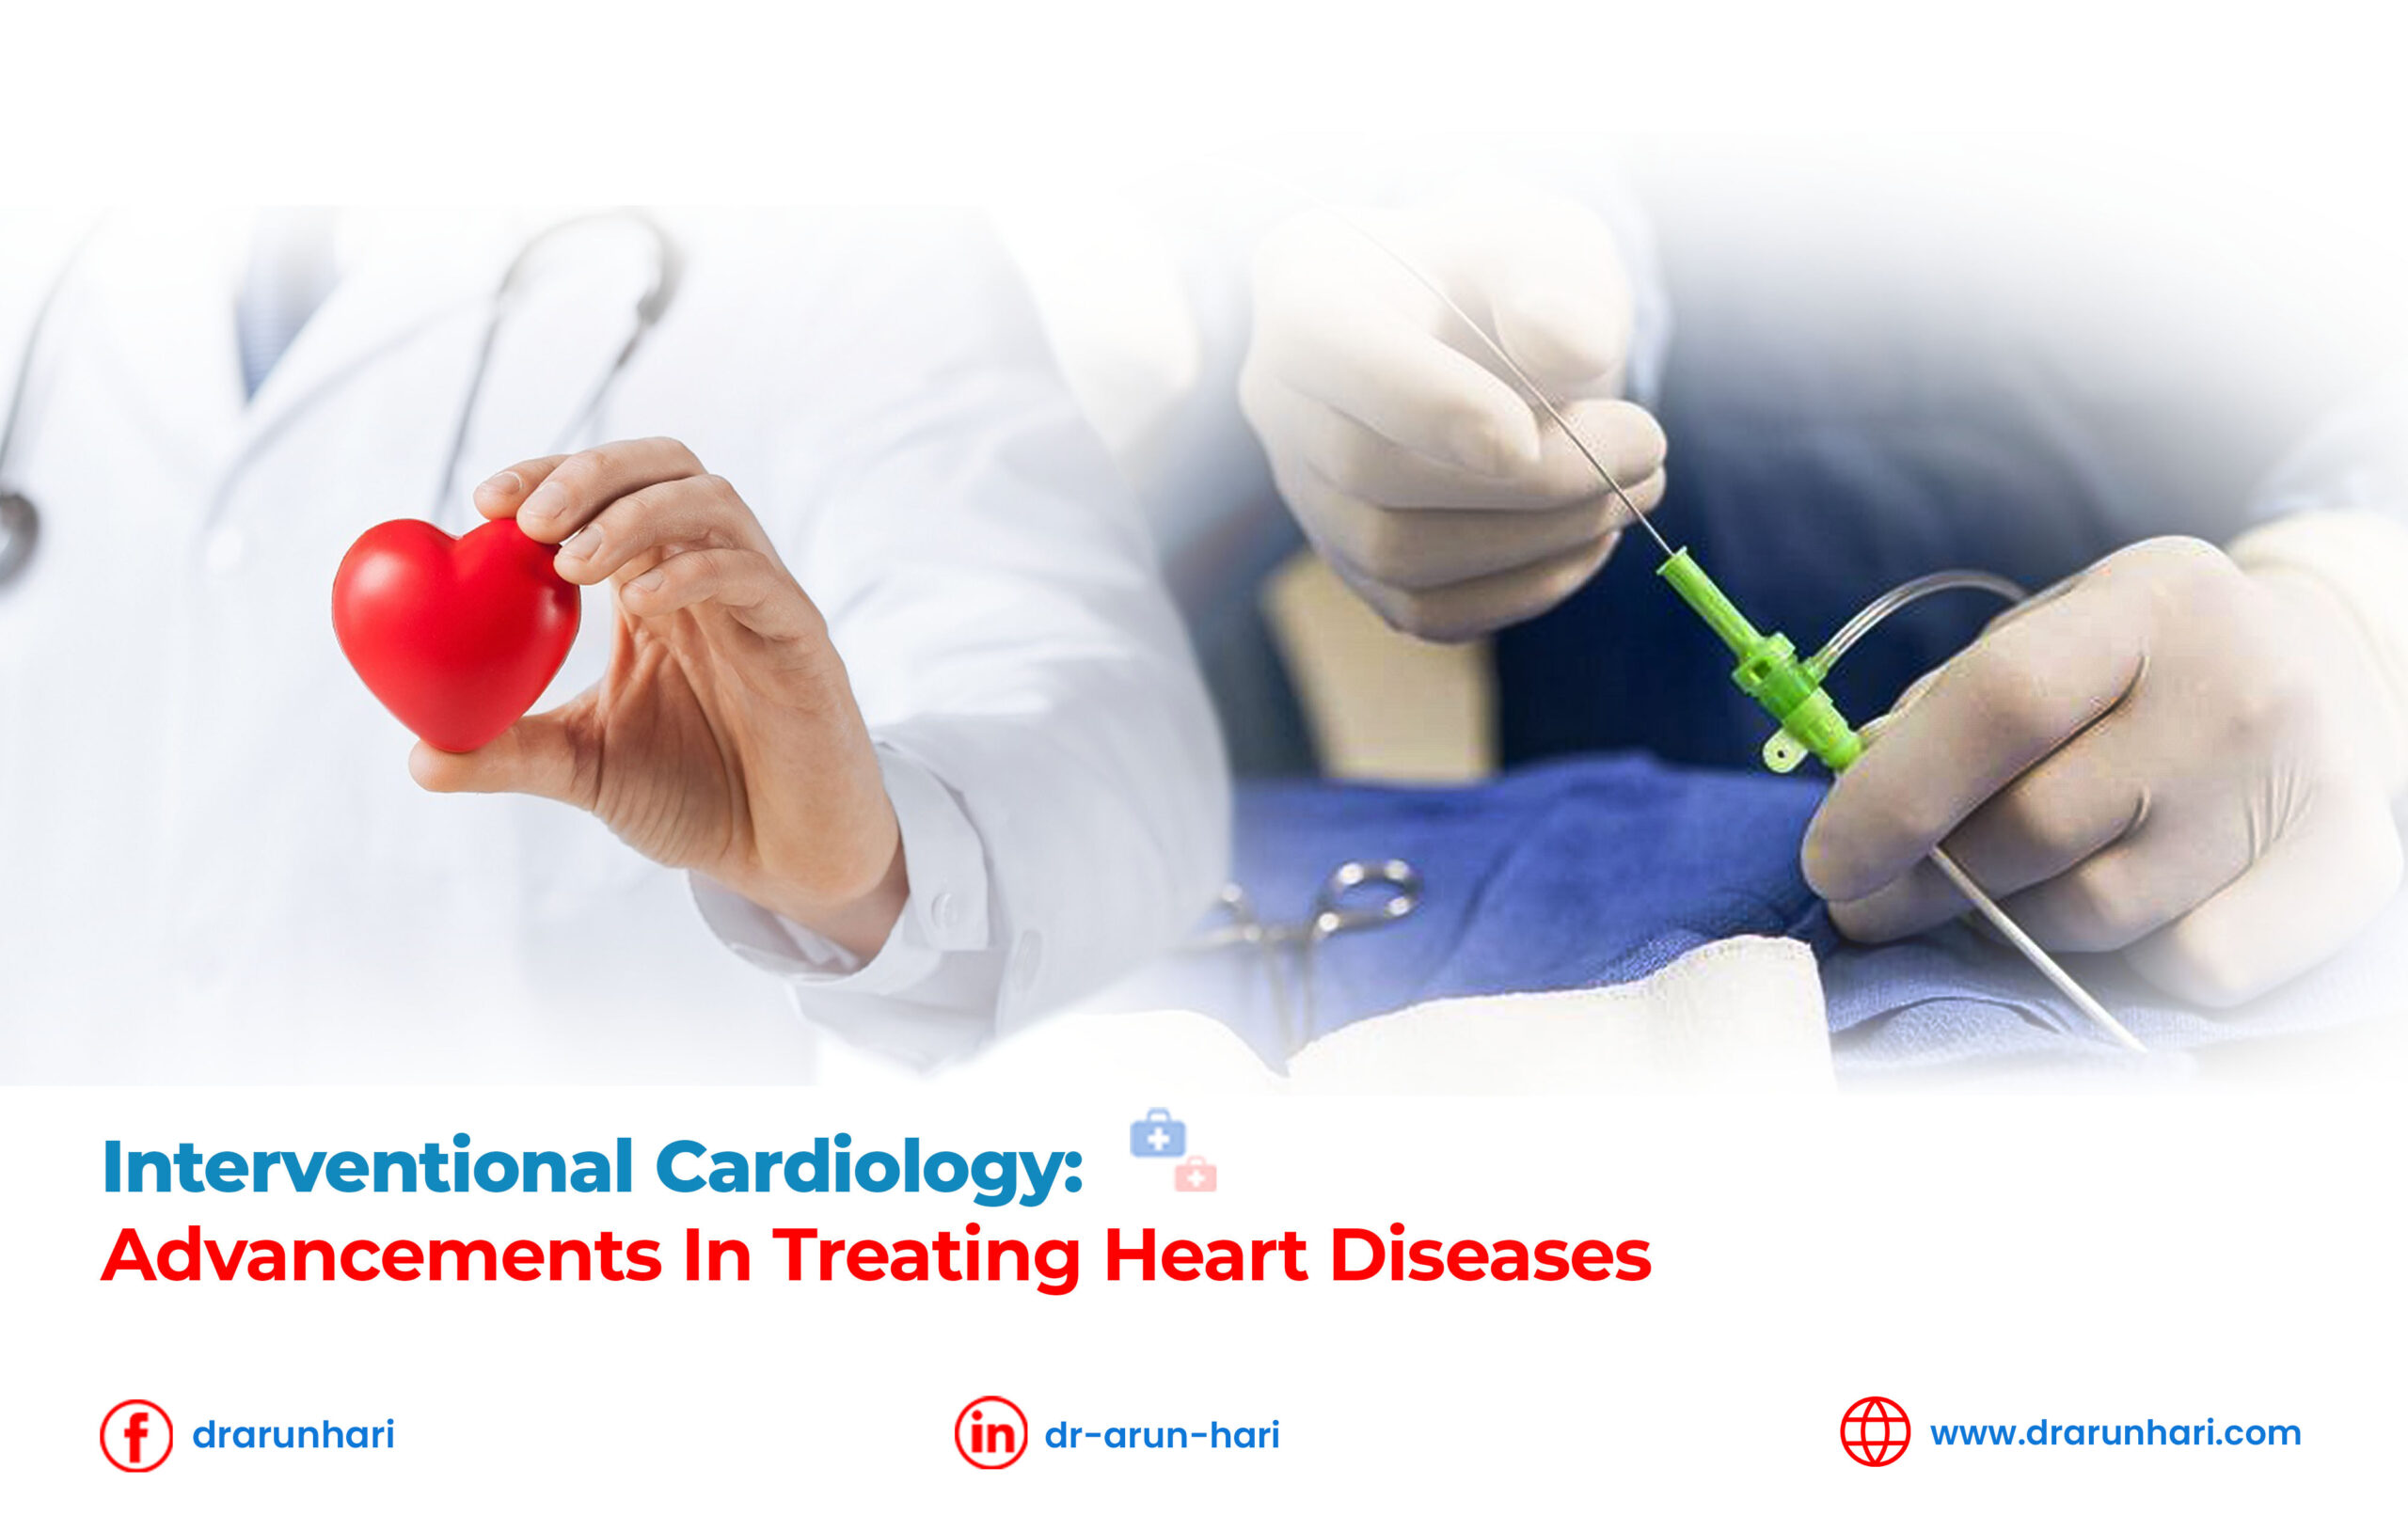 You are currently viewing Interventional Cardiology: Advancements in Treating Heart Diseases